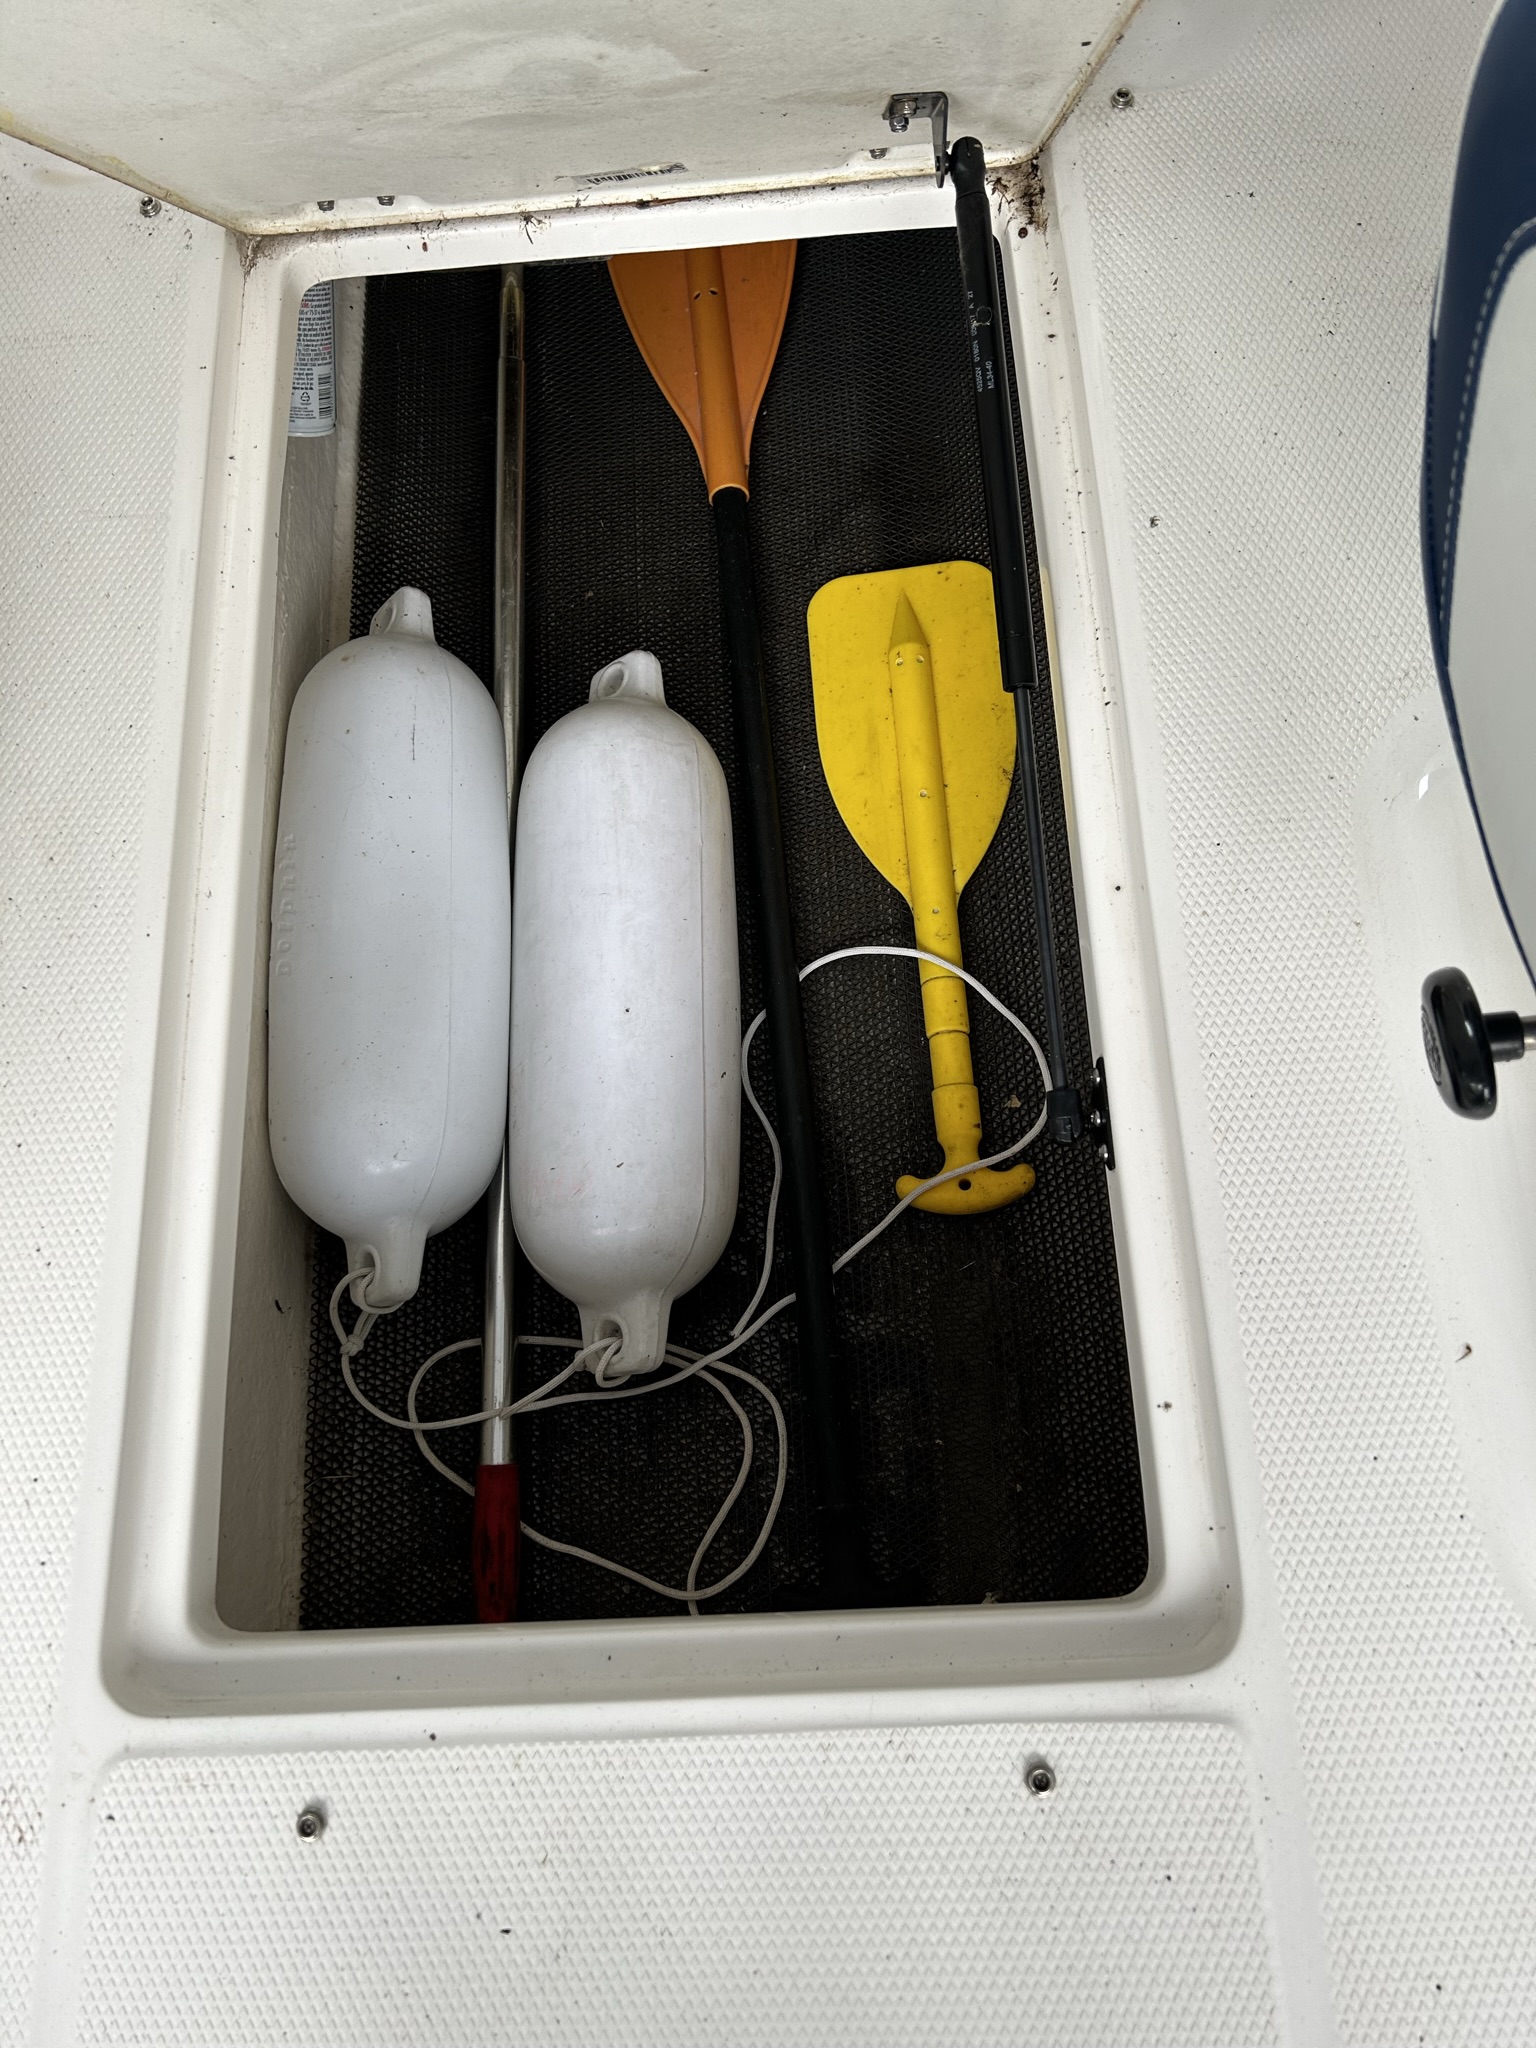 Photo of 2018 Chaparral 21 H2O SPORT OB